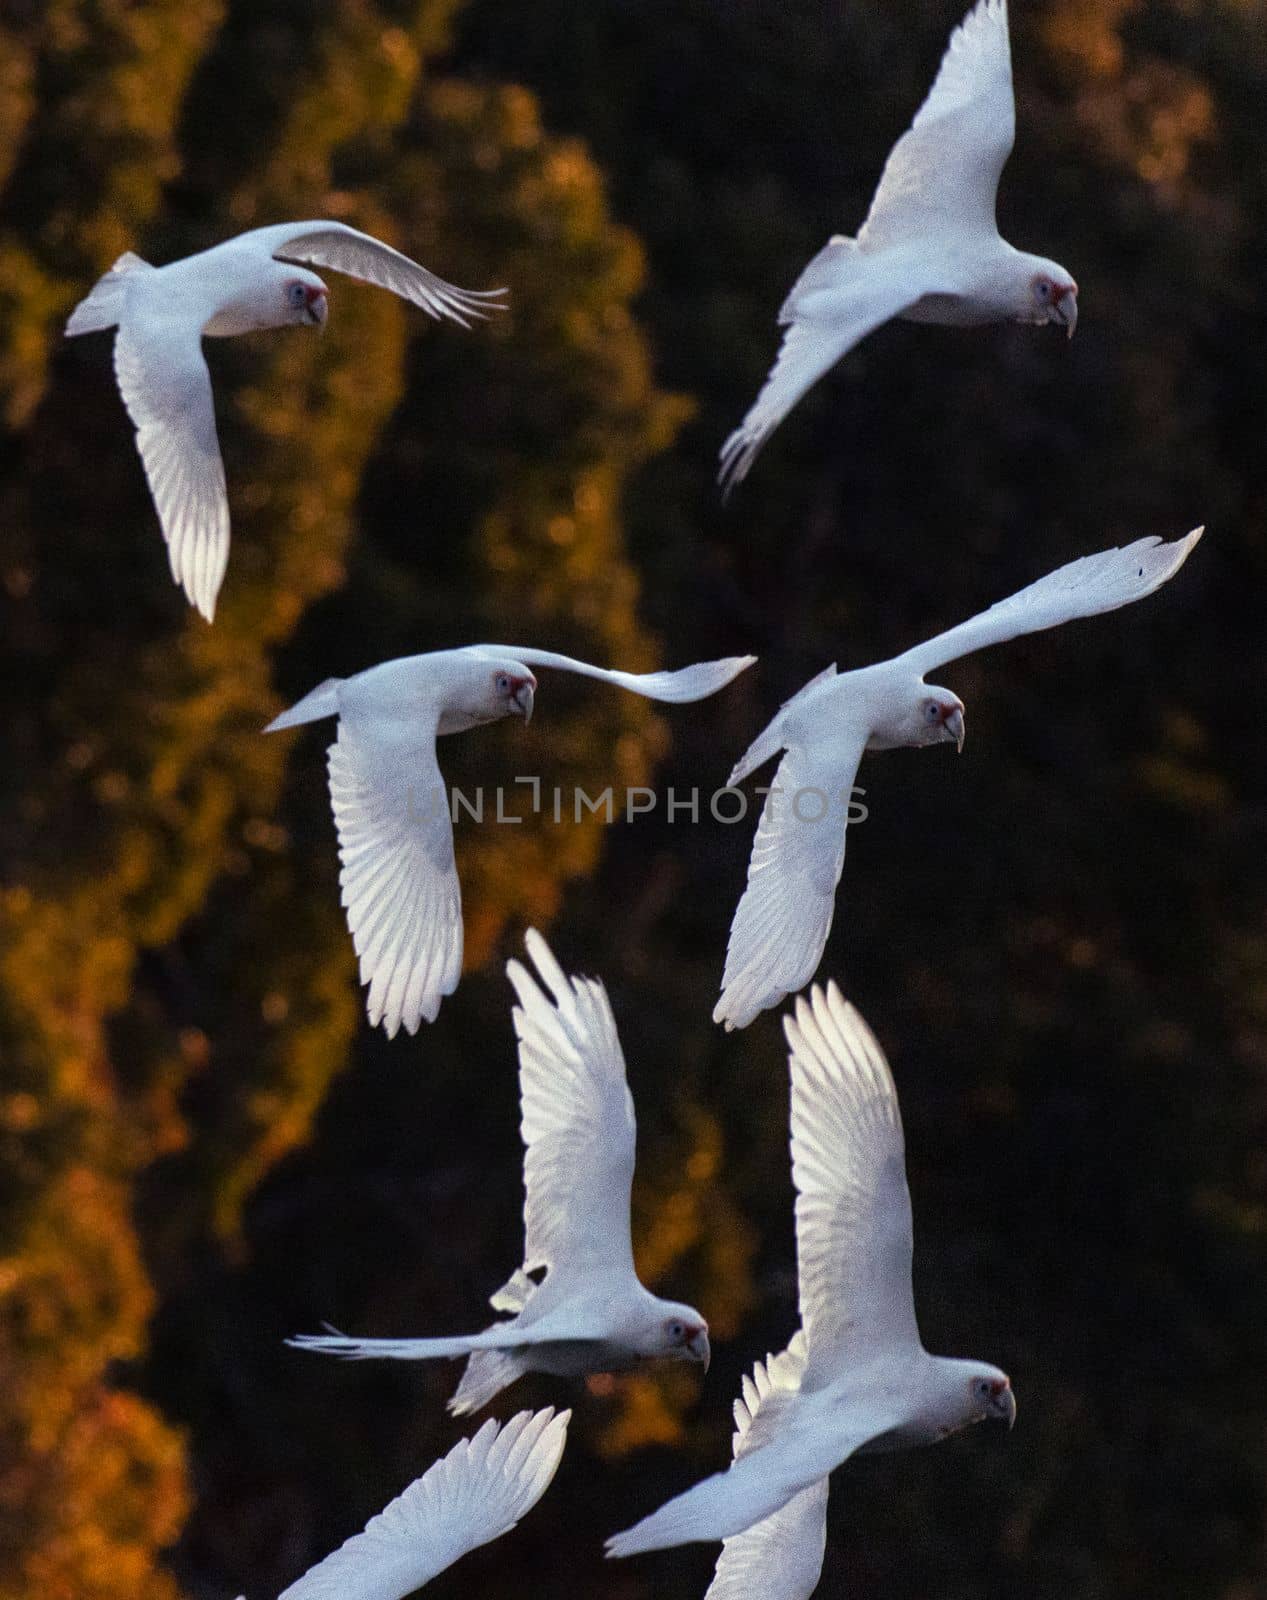 Portrait shot of a flock of little corellas in flight at sunset by StefanMal